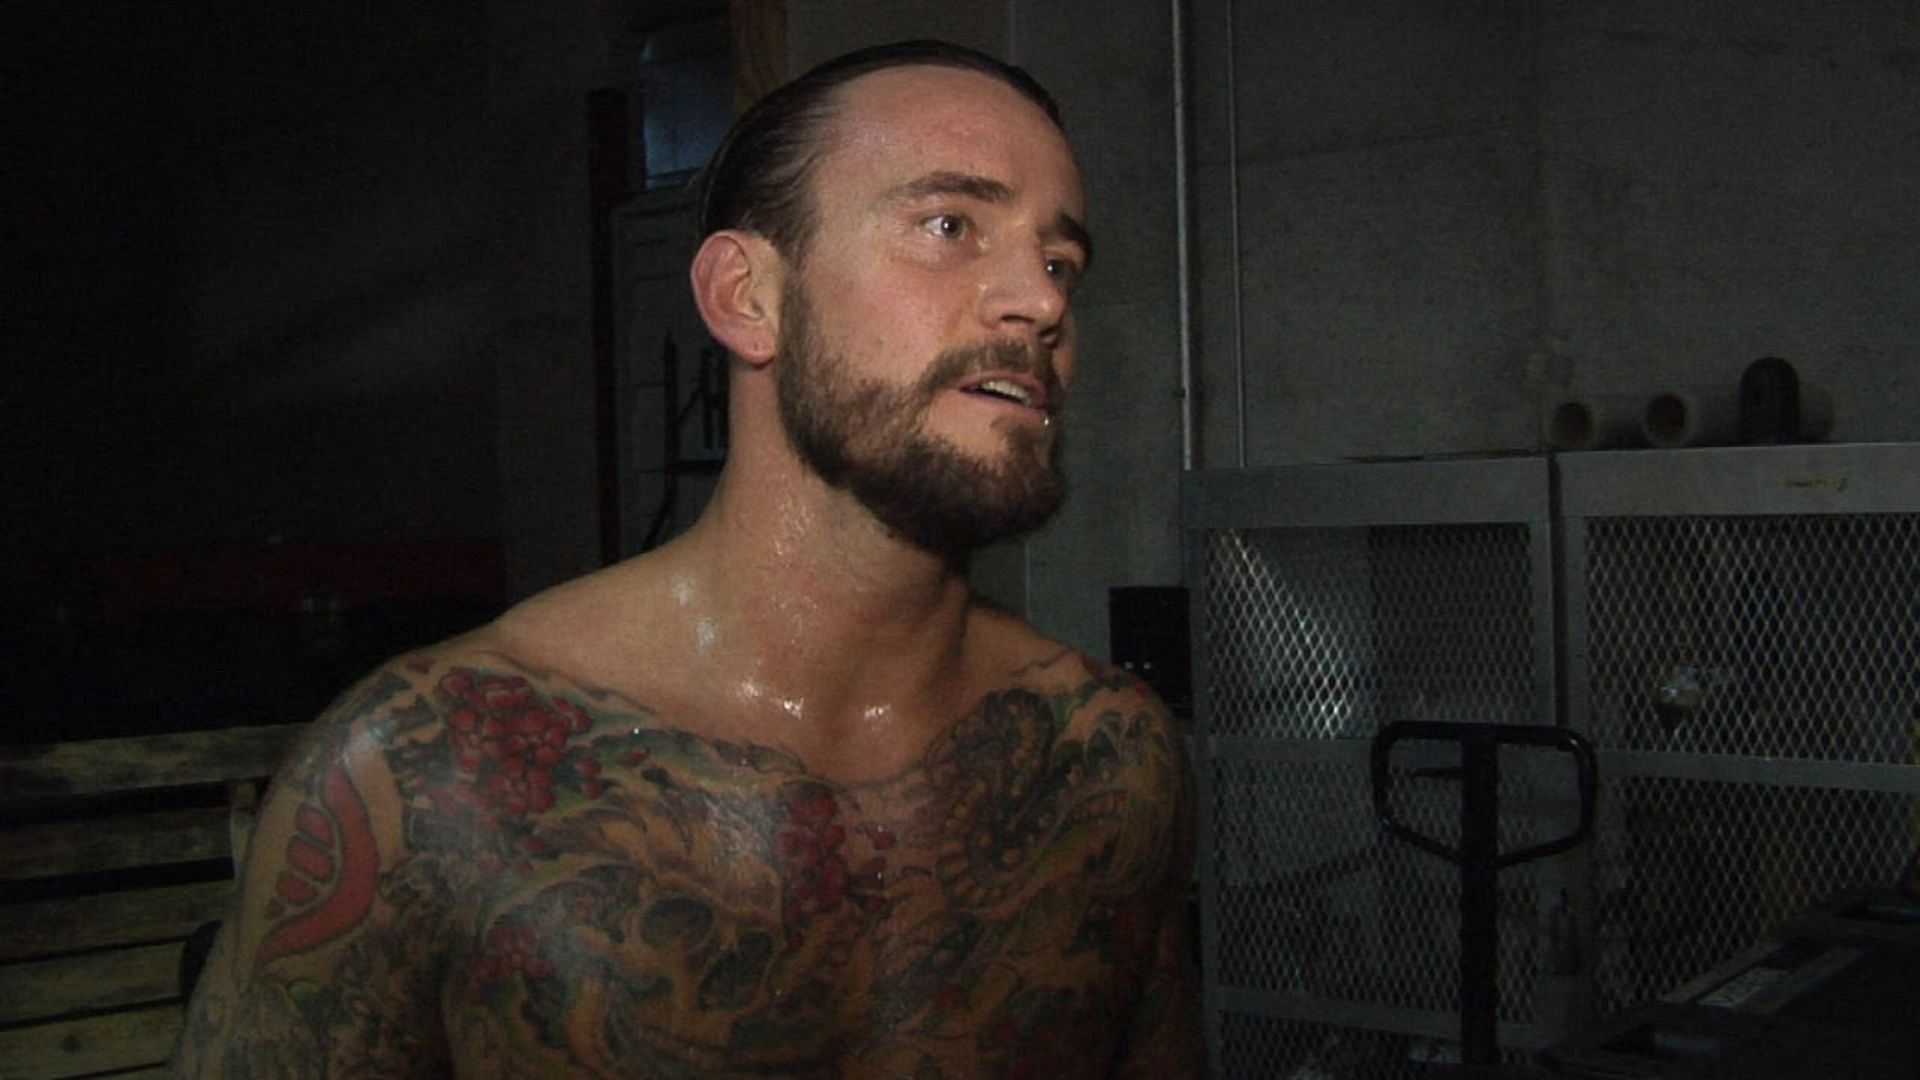 Current AEW talent and former WWE Superstar CM Punk